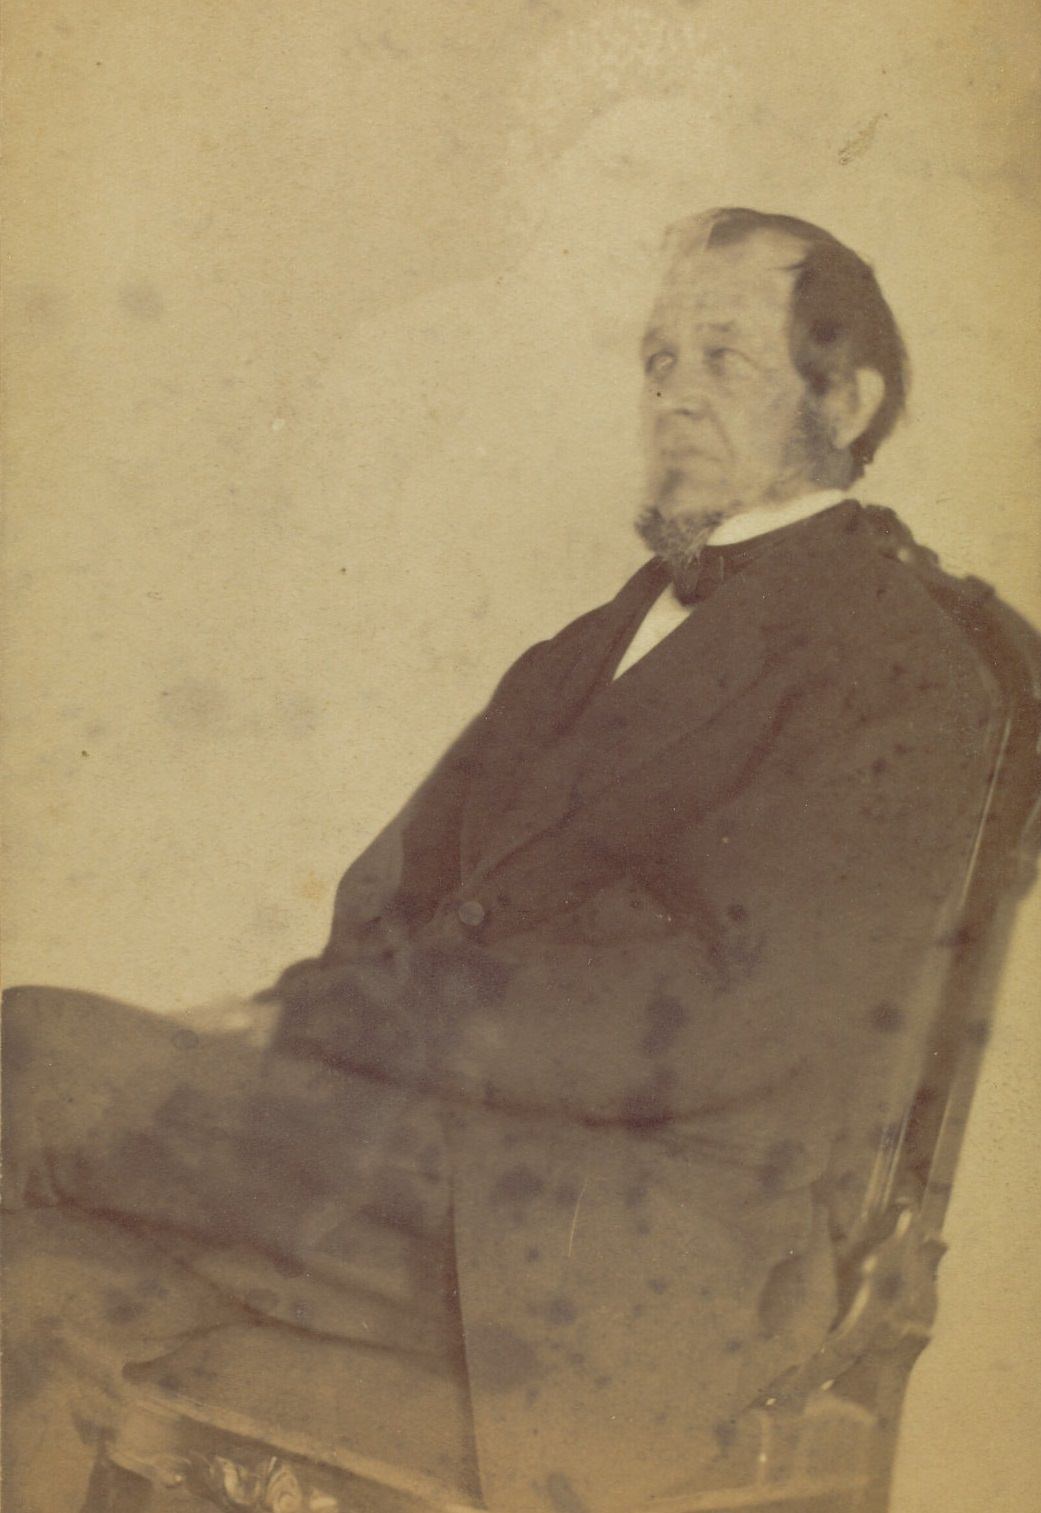 Profile portrait of a seated man with a goatee. A very faint image of a woman is visible above him.